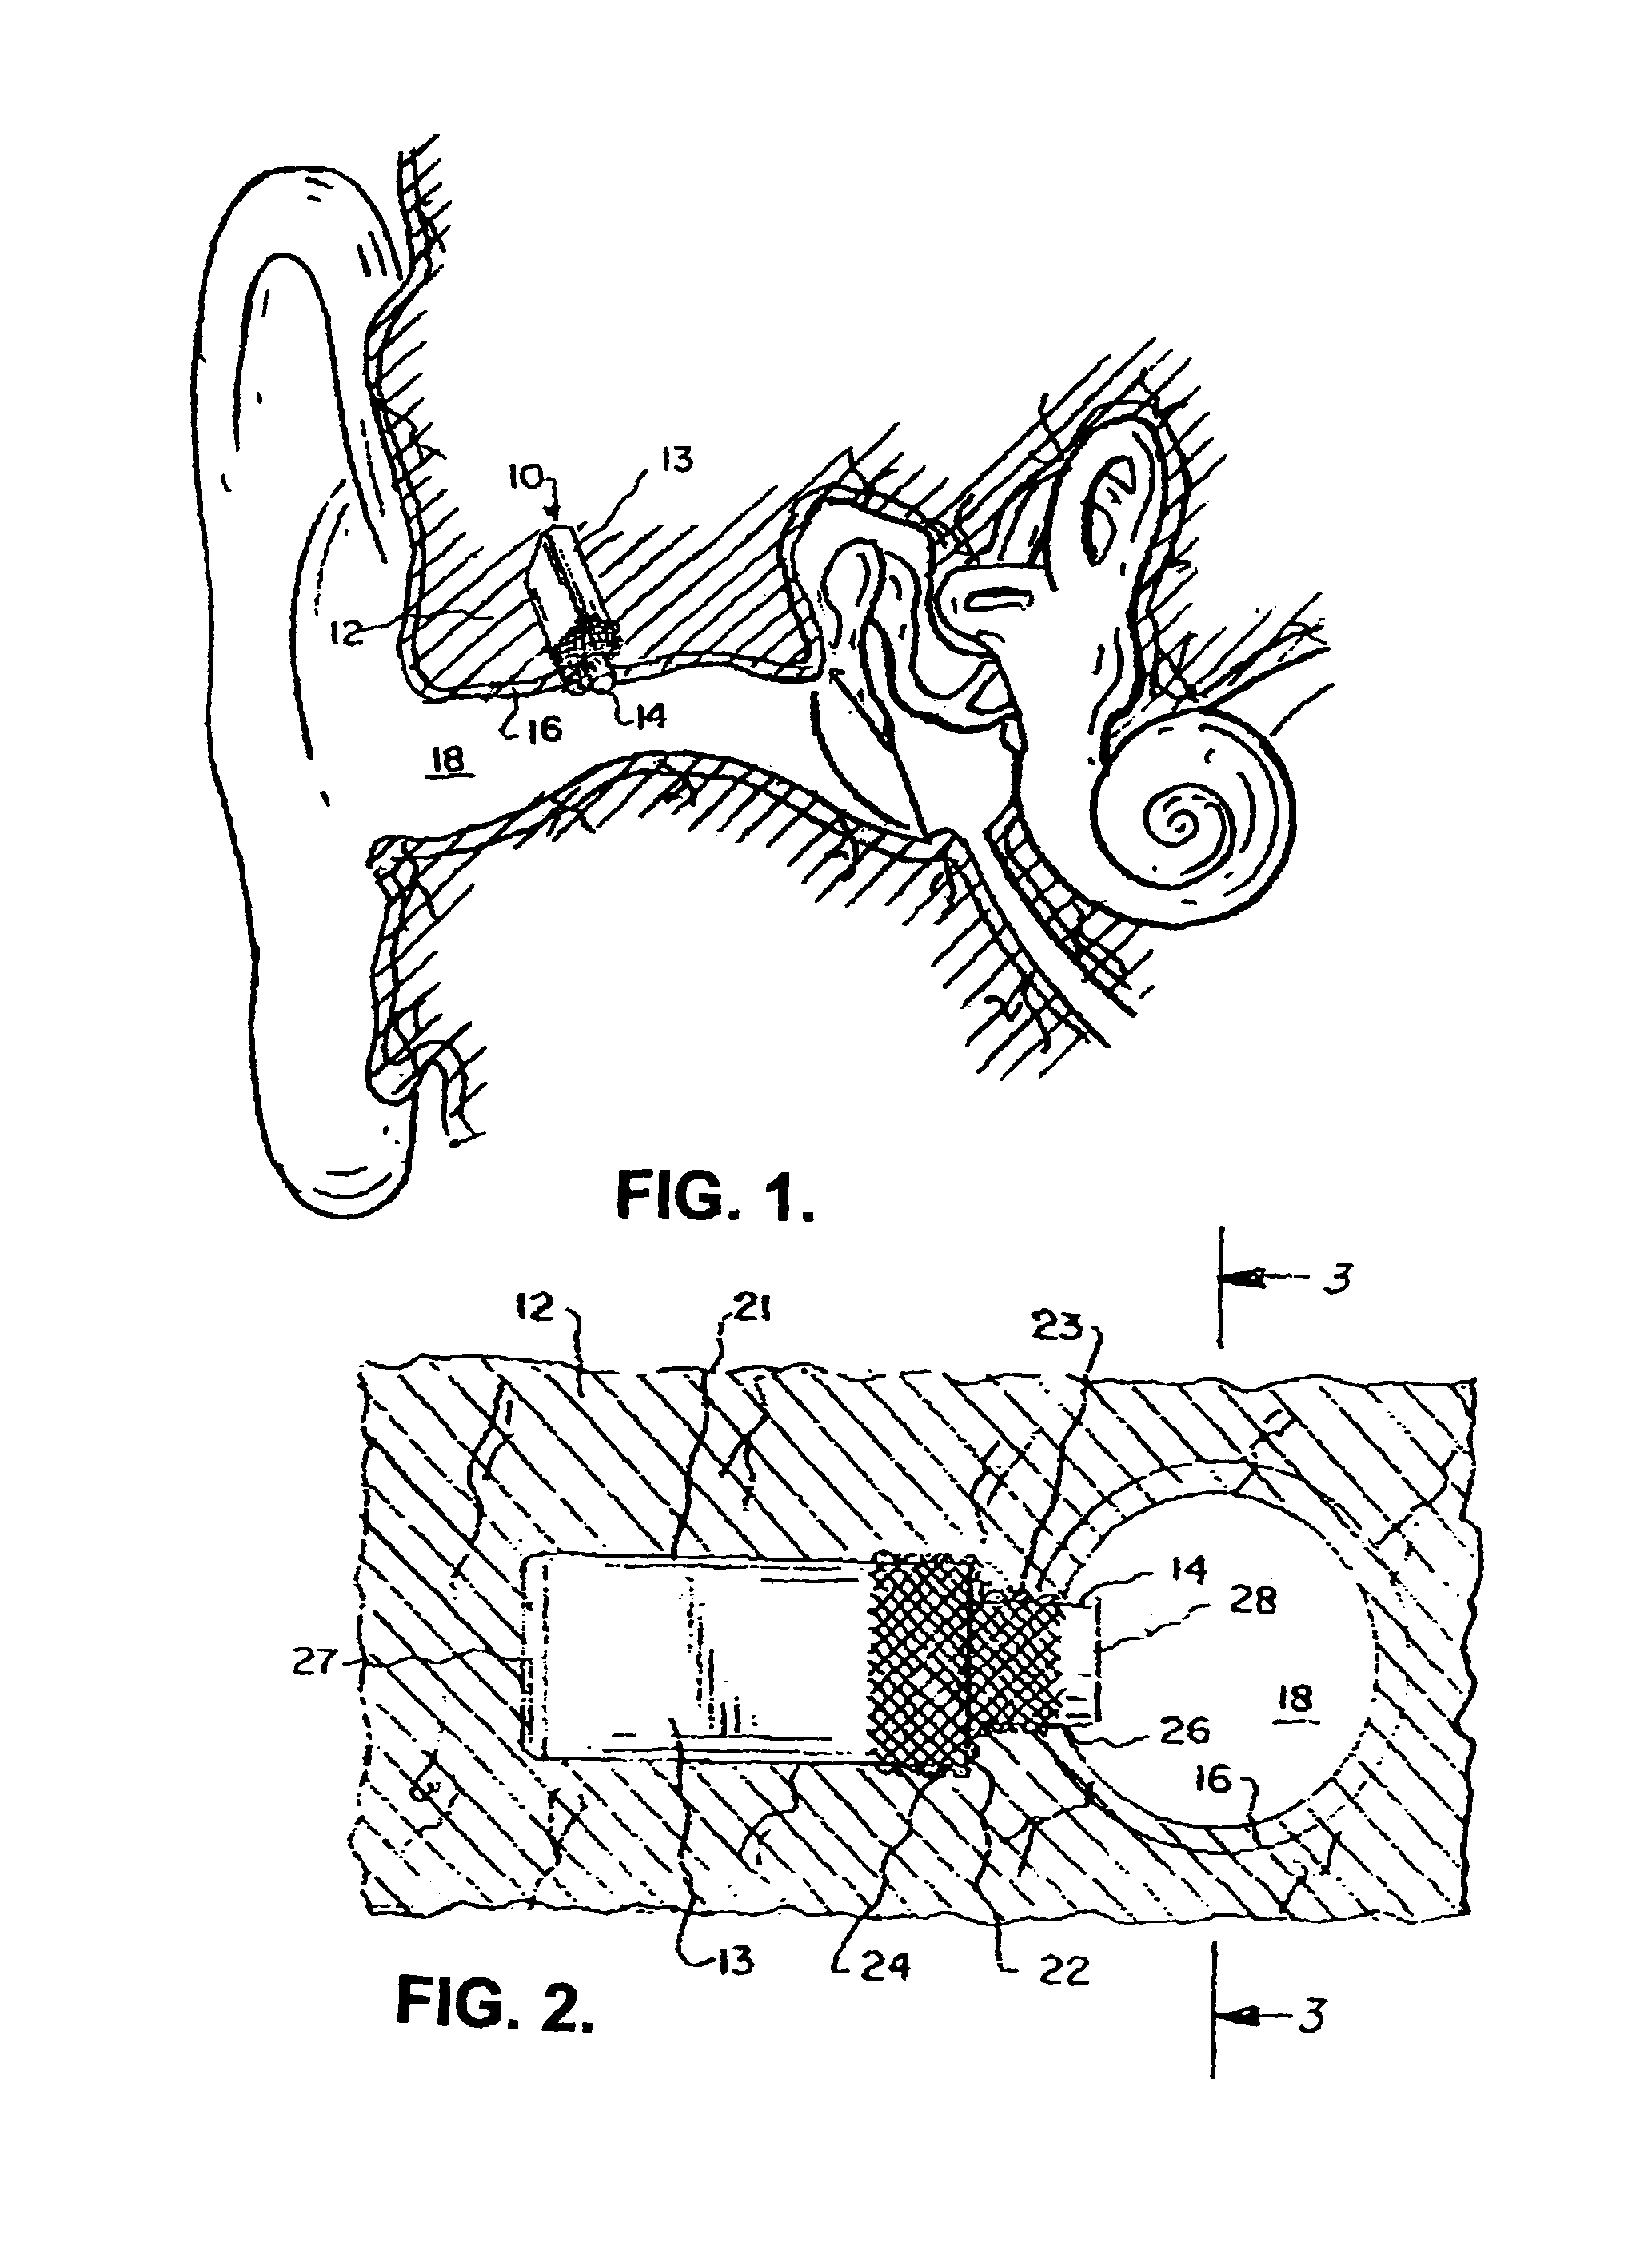 In-the-canal hearing aid using two microphones